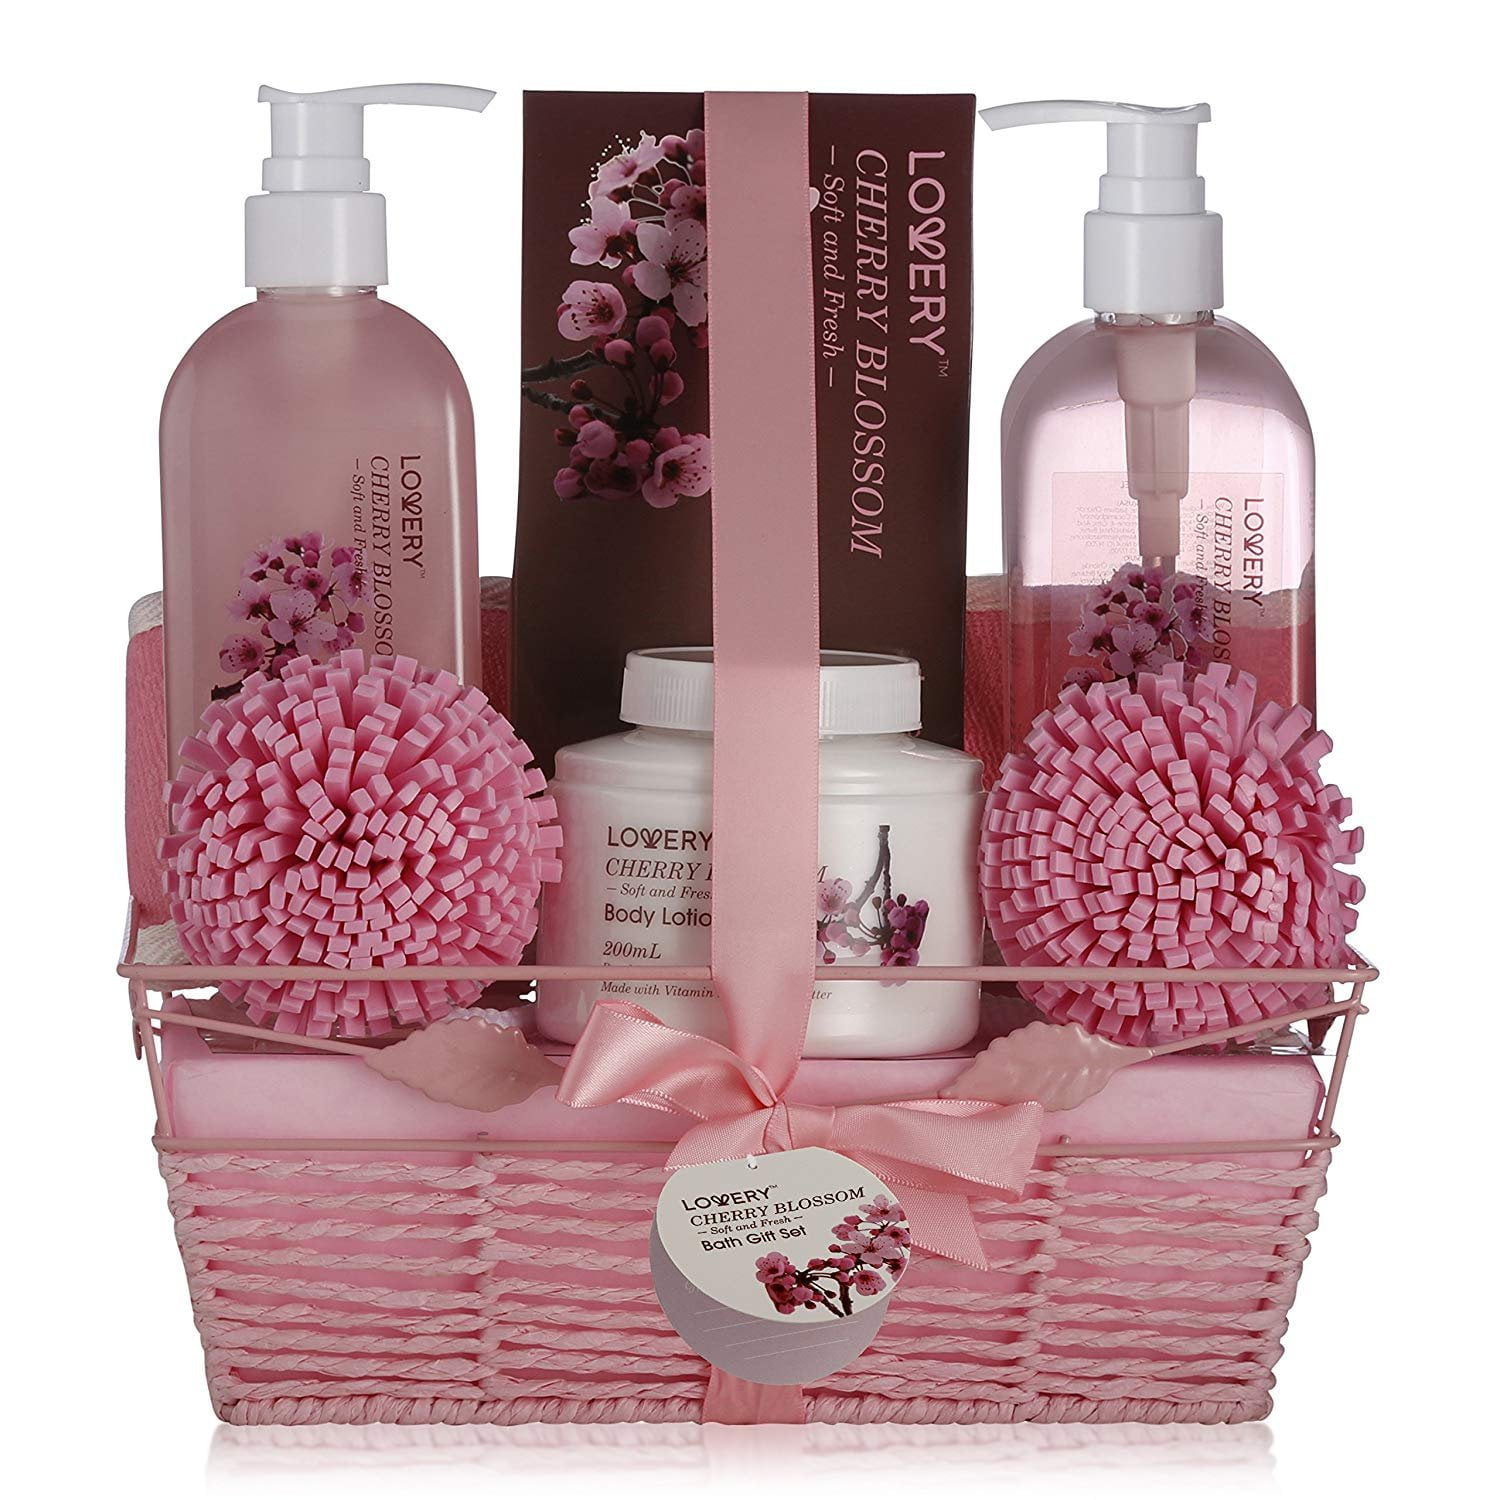 5 pieces "Cherry Blossom" Scented Soap Shower Wedding Favors 